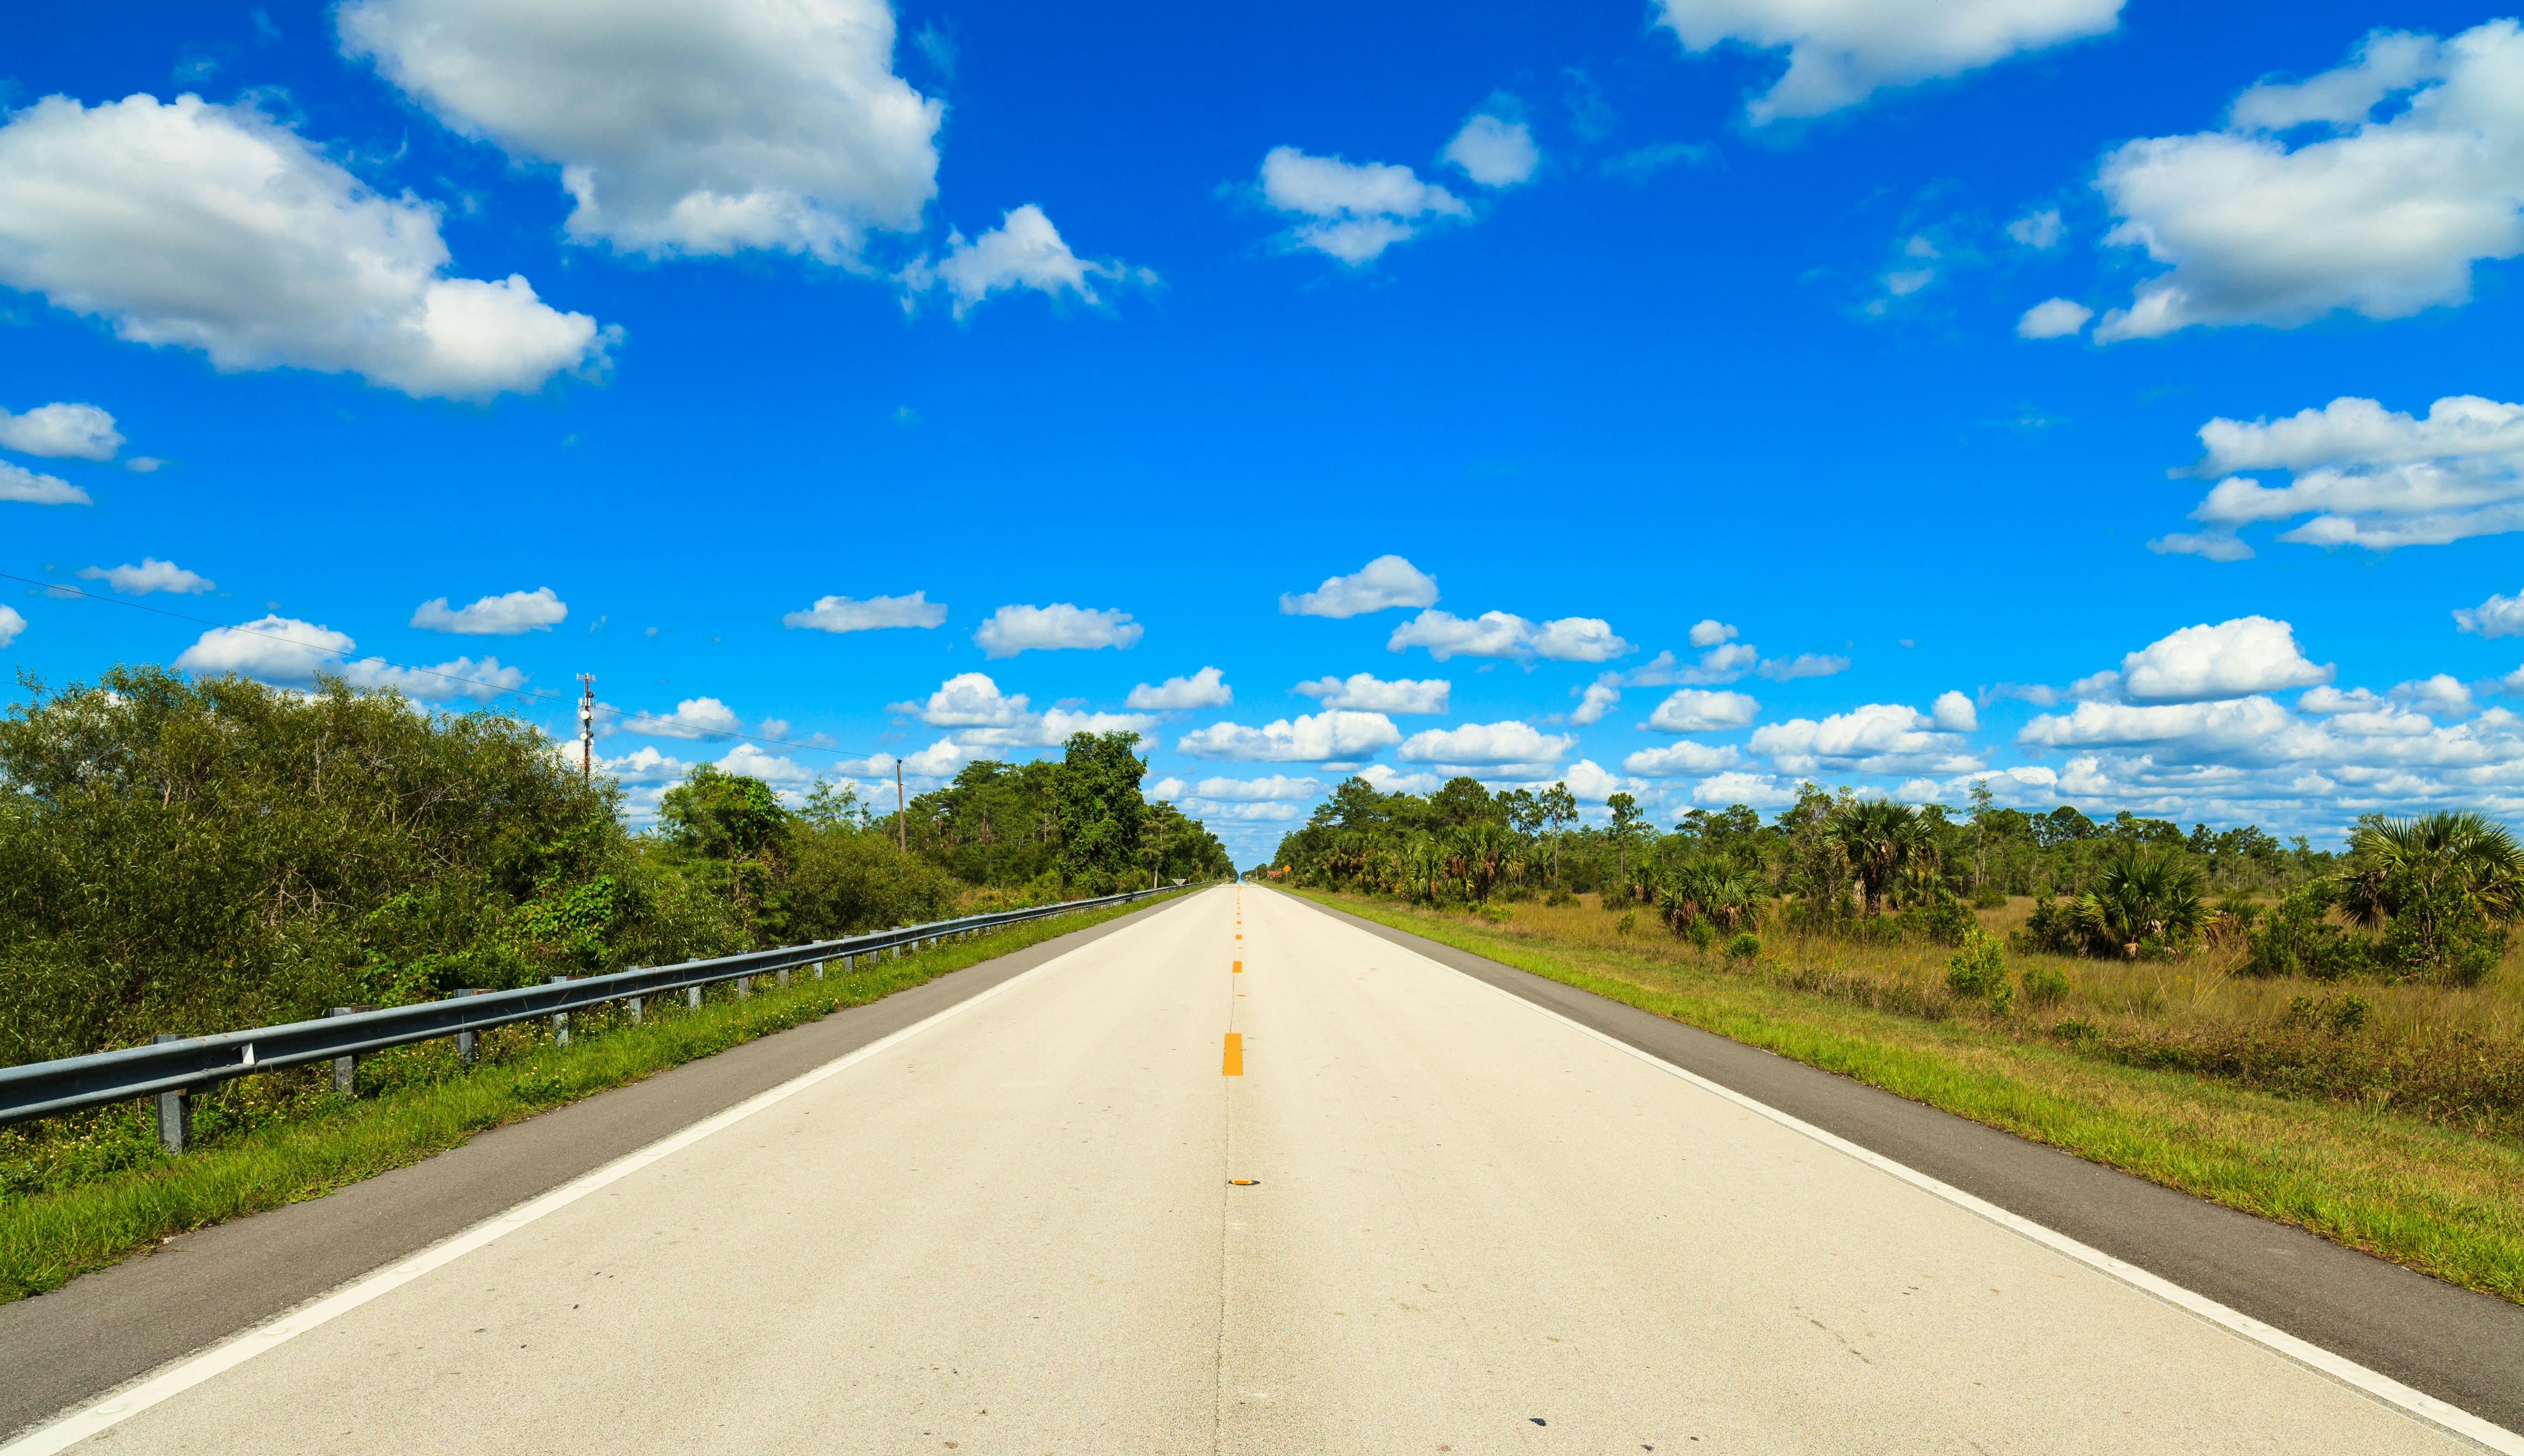 Riding on a beautiful flat highway along Route 41 also known as Tamiami Trail through Florida